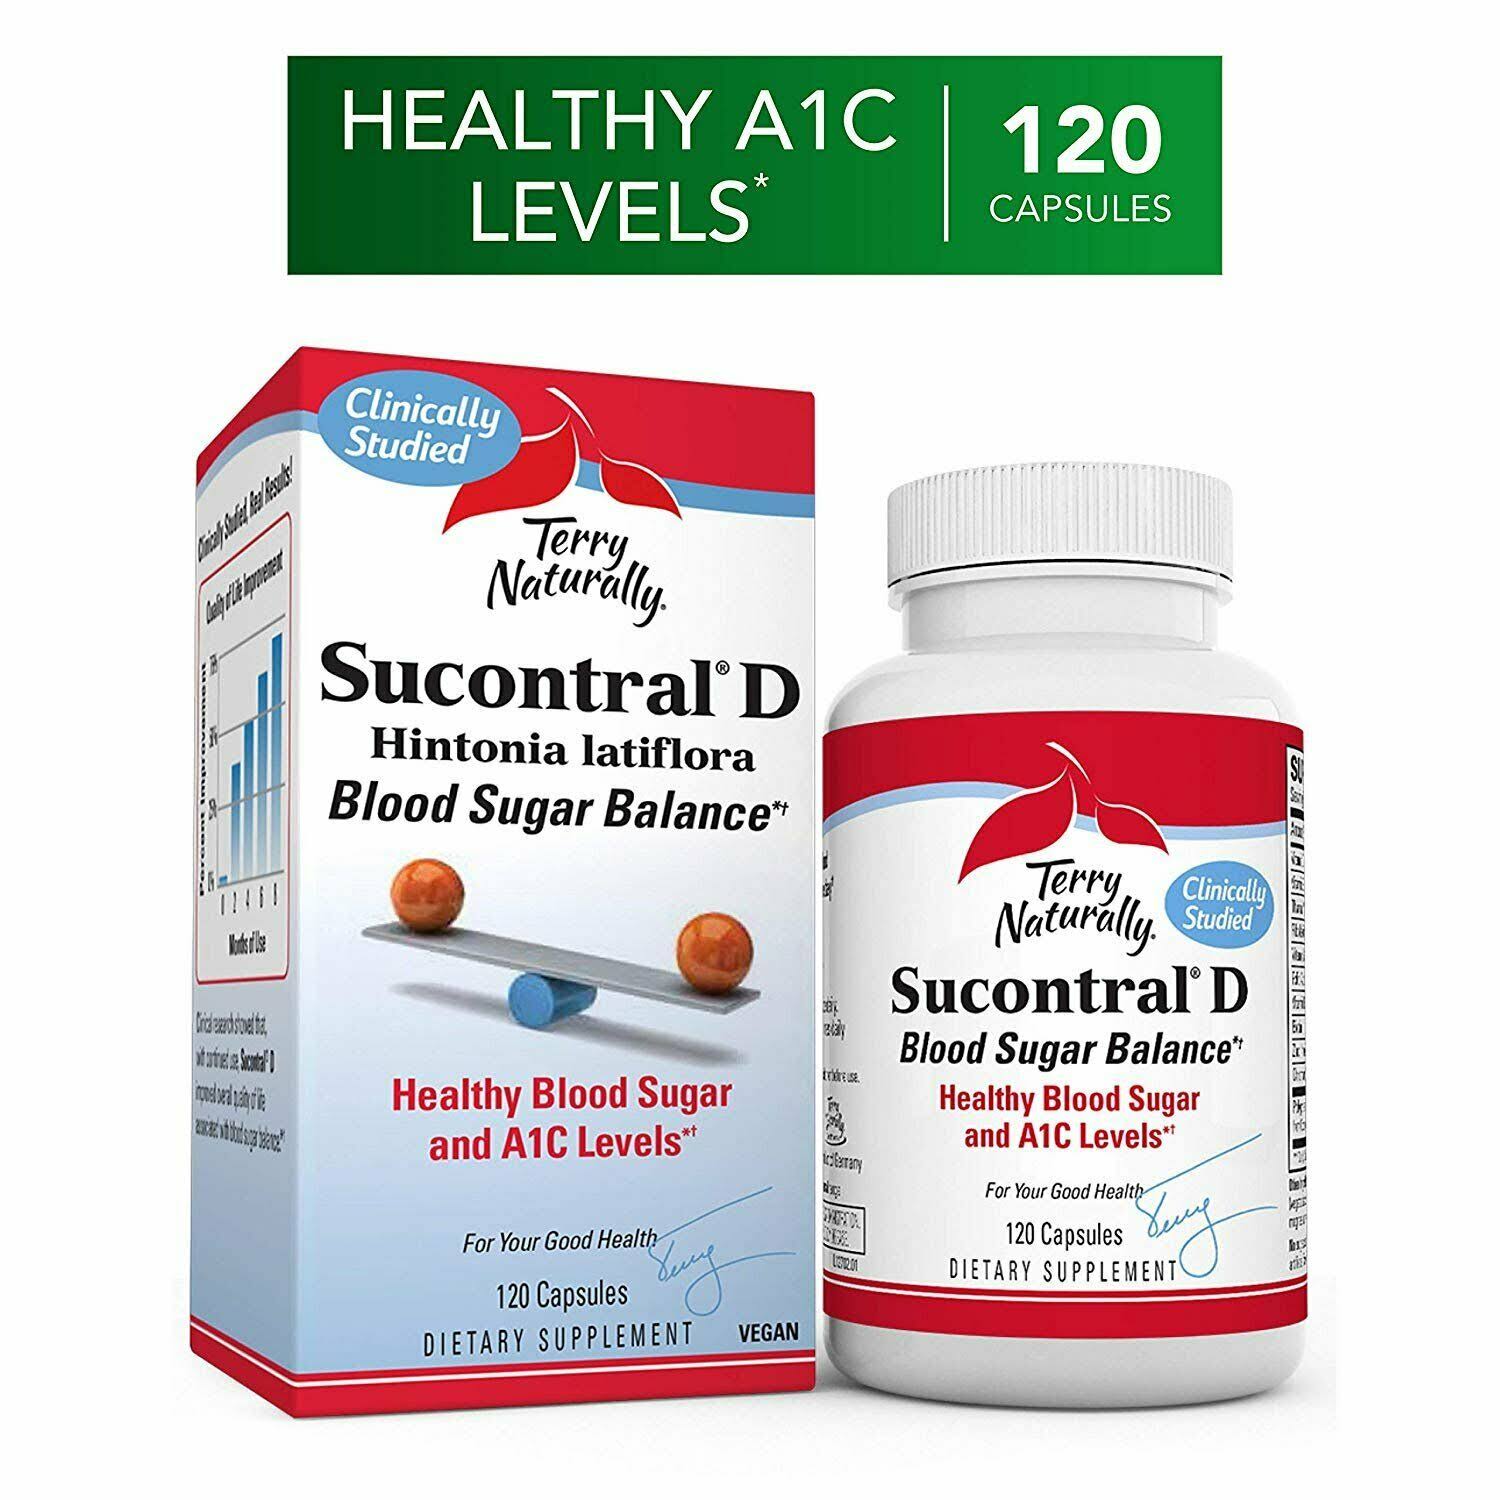 Terry Naturally Sucontral D Blood Sugar Balance 120 Capsules